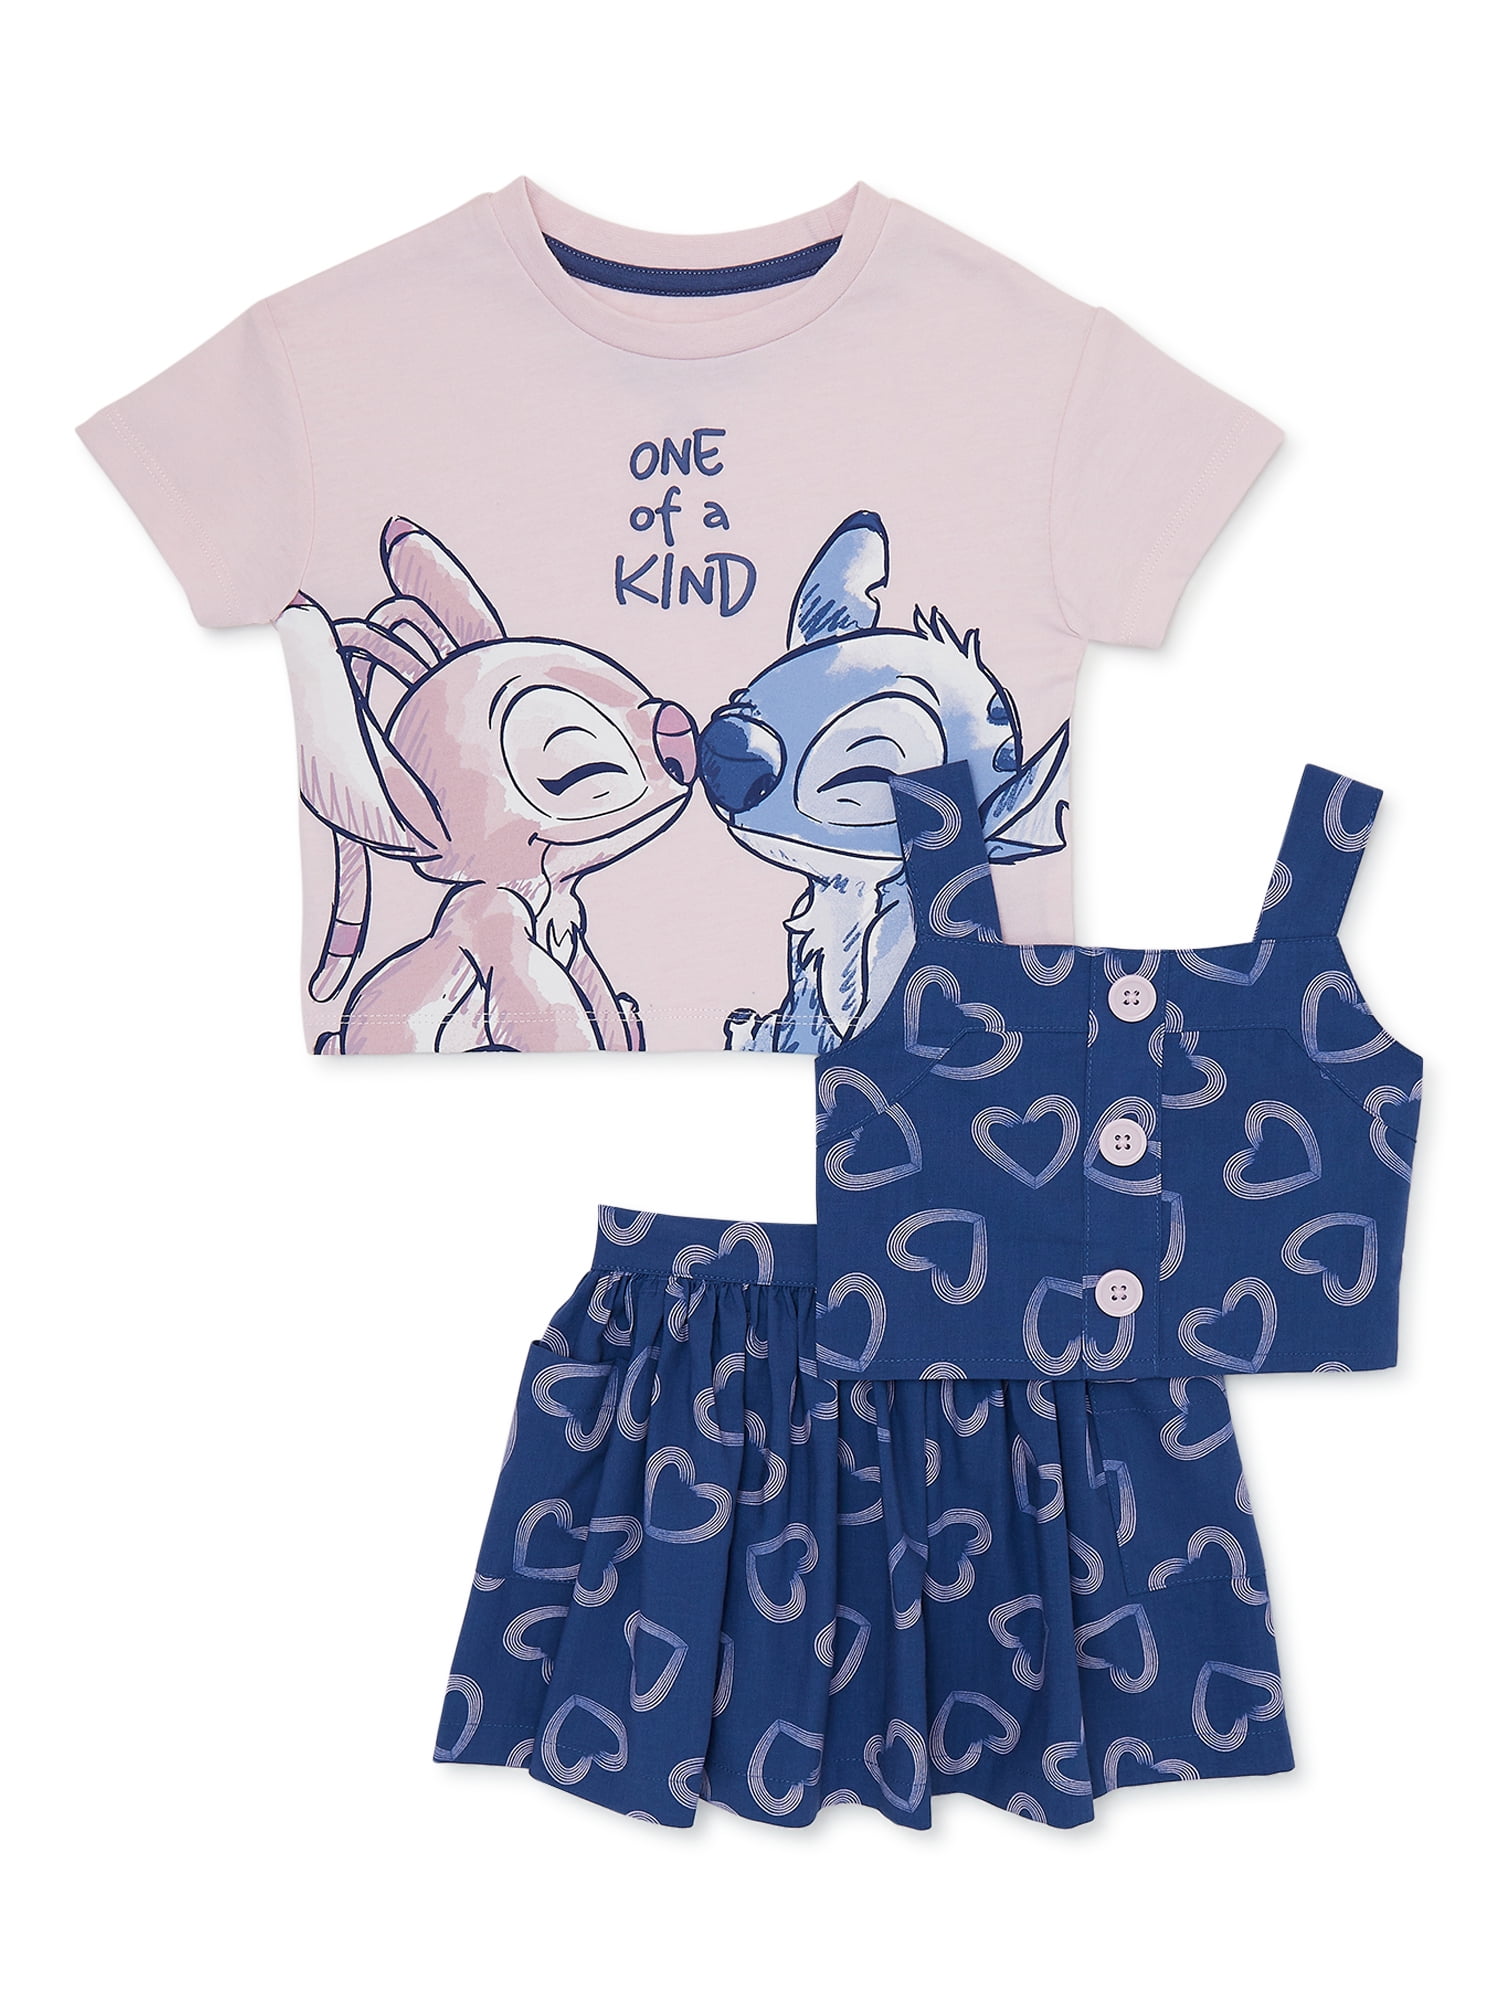 Stitch Baby and Toddler Girls Tee, Tank and Skirt Set, 3-Piece, Sizes 12M-5T